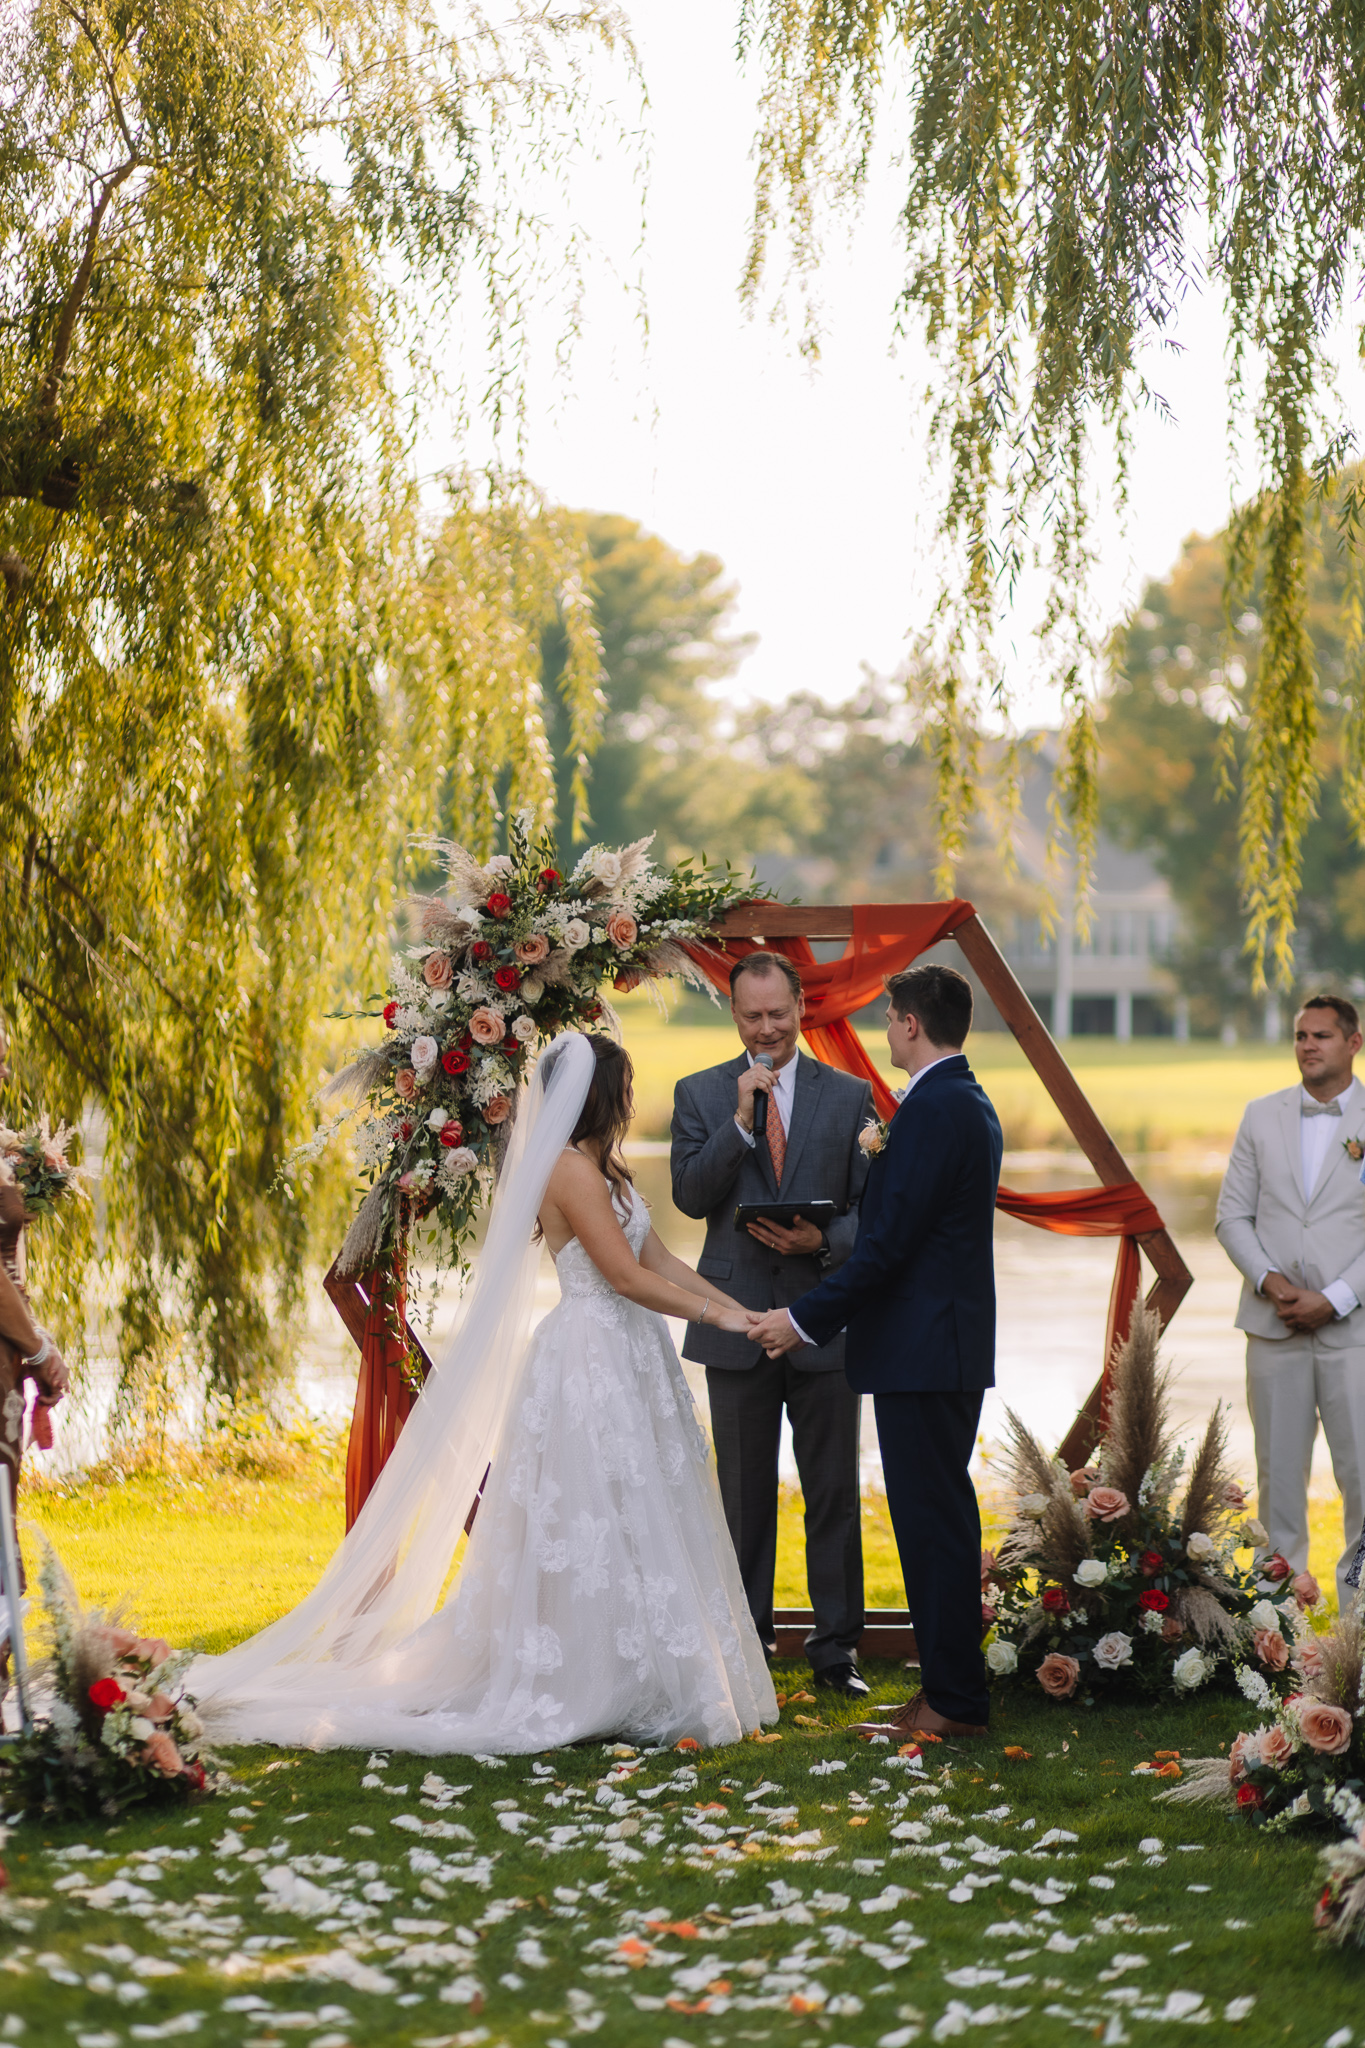 A beautiful summer wedding ceremony in front of Willow trees and a lake